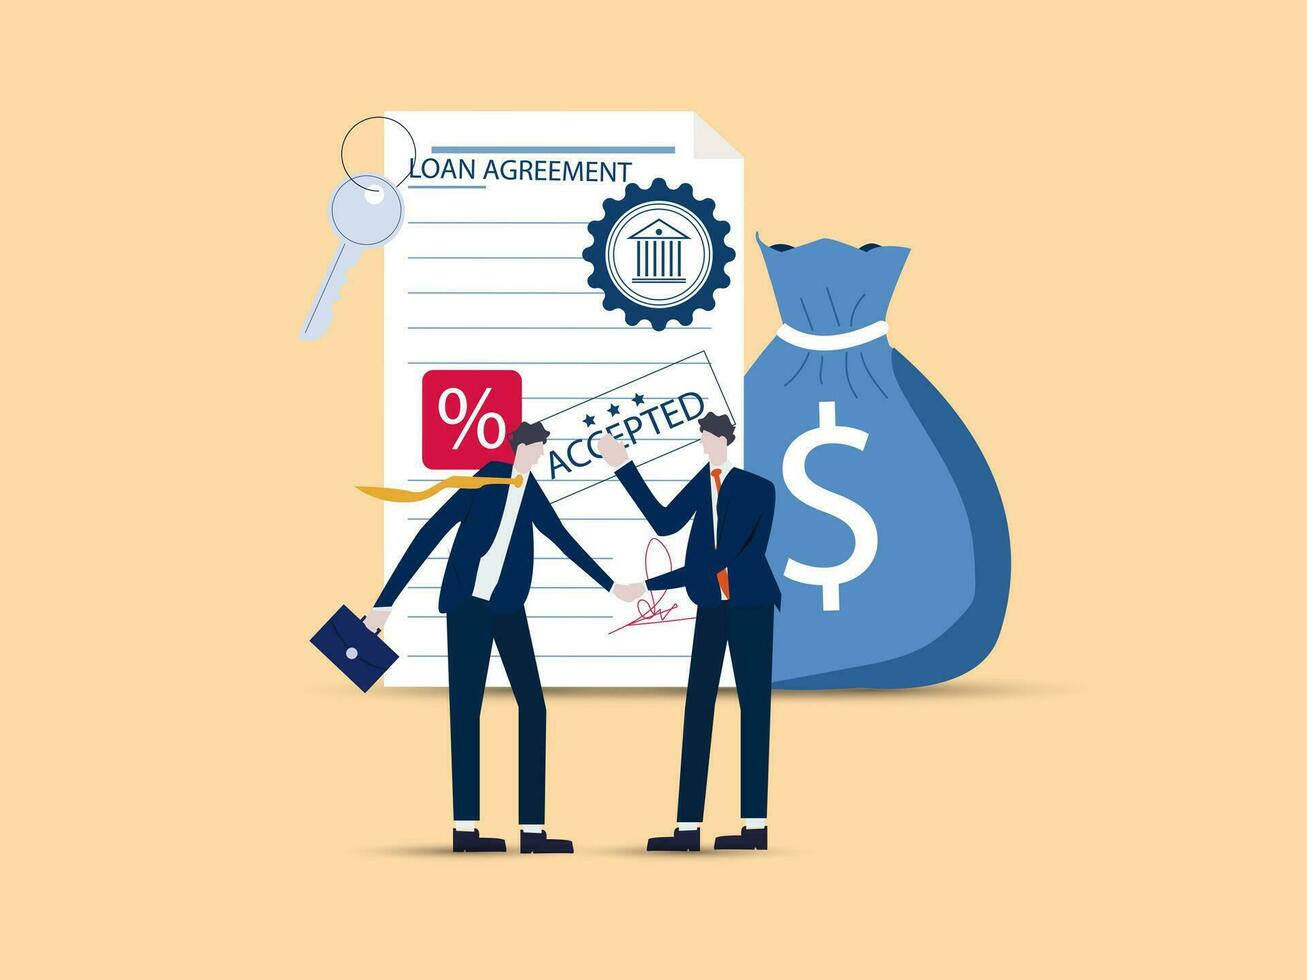 Loan agreement borrow money from bank, debt or obligation to pay back interest rate, personal loan or financial support concept, businessman shaking hand with loan agreement. Vector illustration.